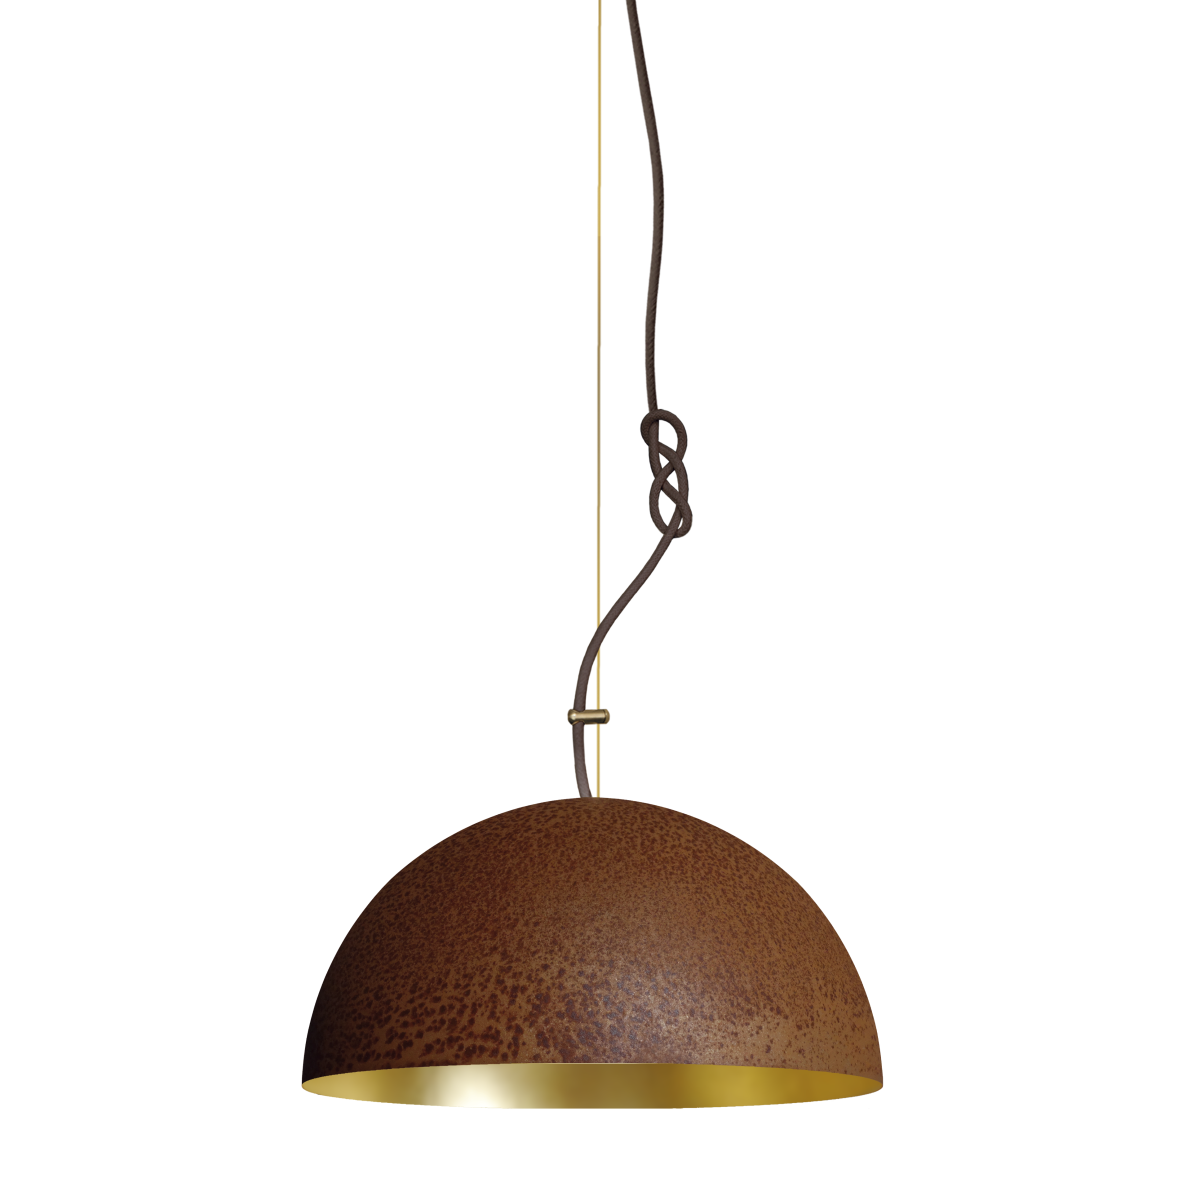 THE QUEEN SMALL - Pendant Light